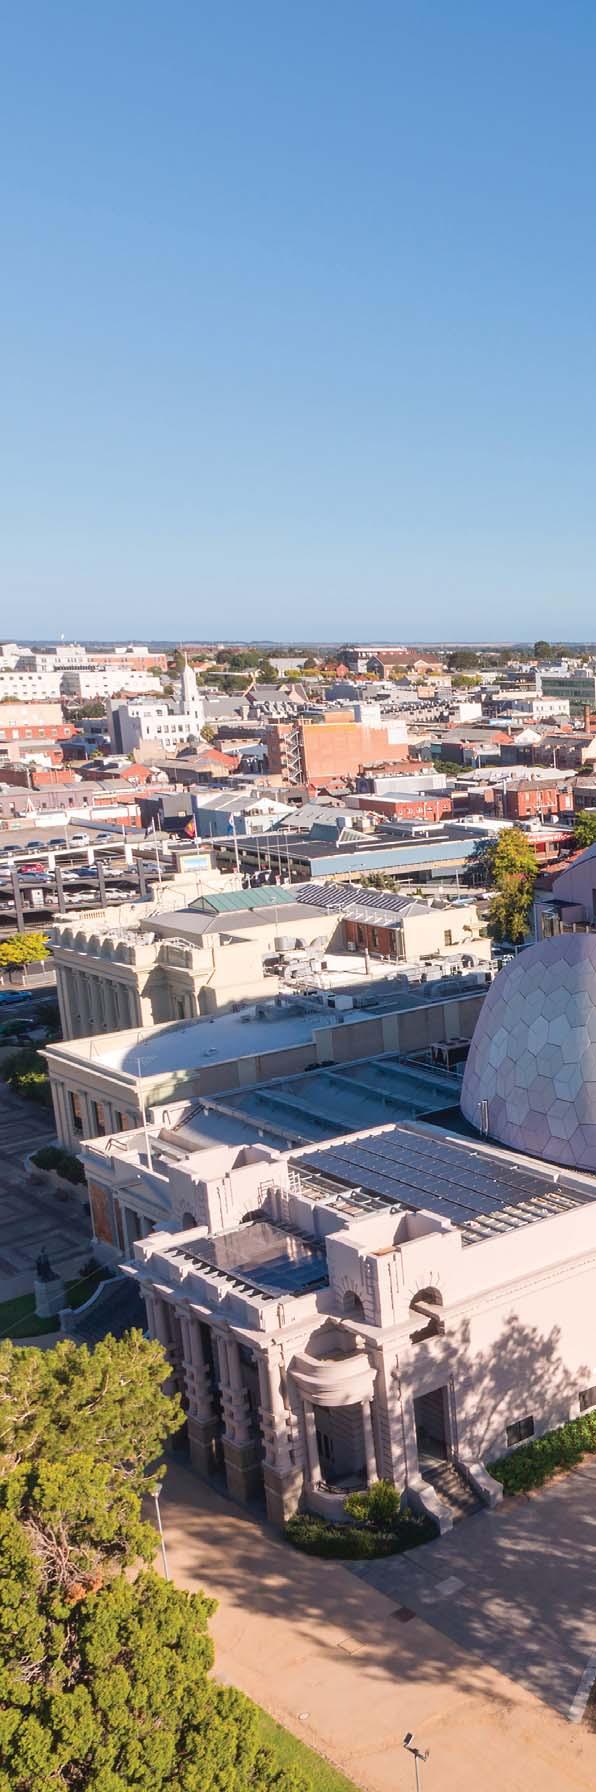 Arts and Cultural Precinct Masterplan July 2017 This report has been prepared by the Revitalising Central Geelong Partnership in association with Town Matters Pty Ltd and Perry Mills and Associates.